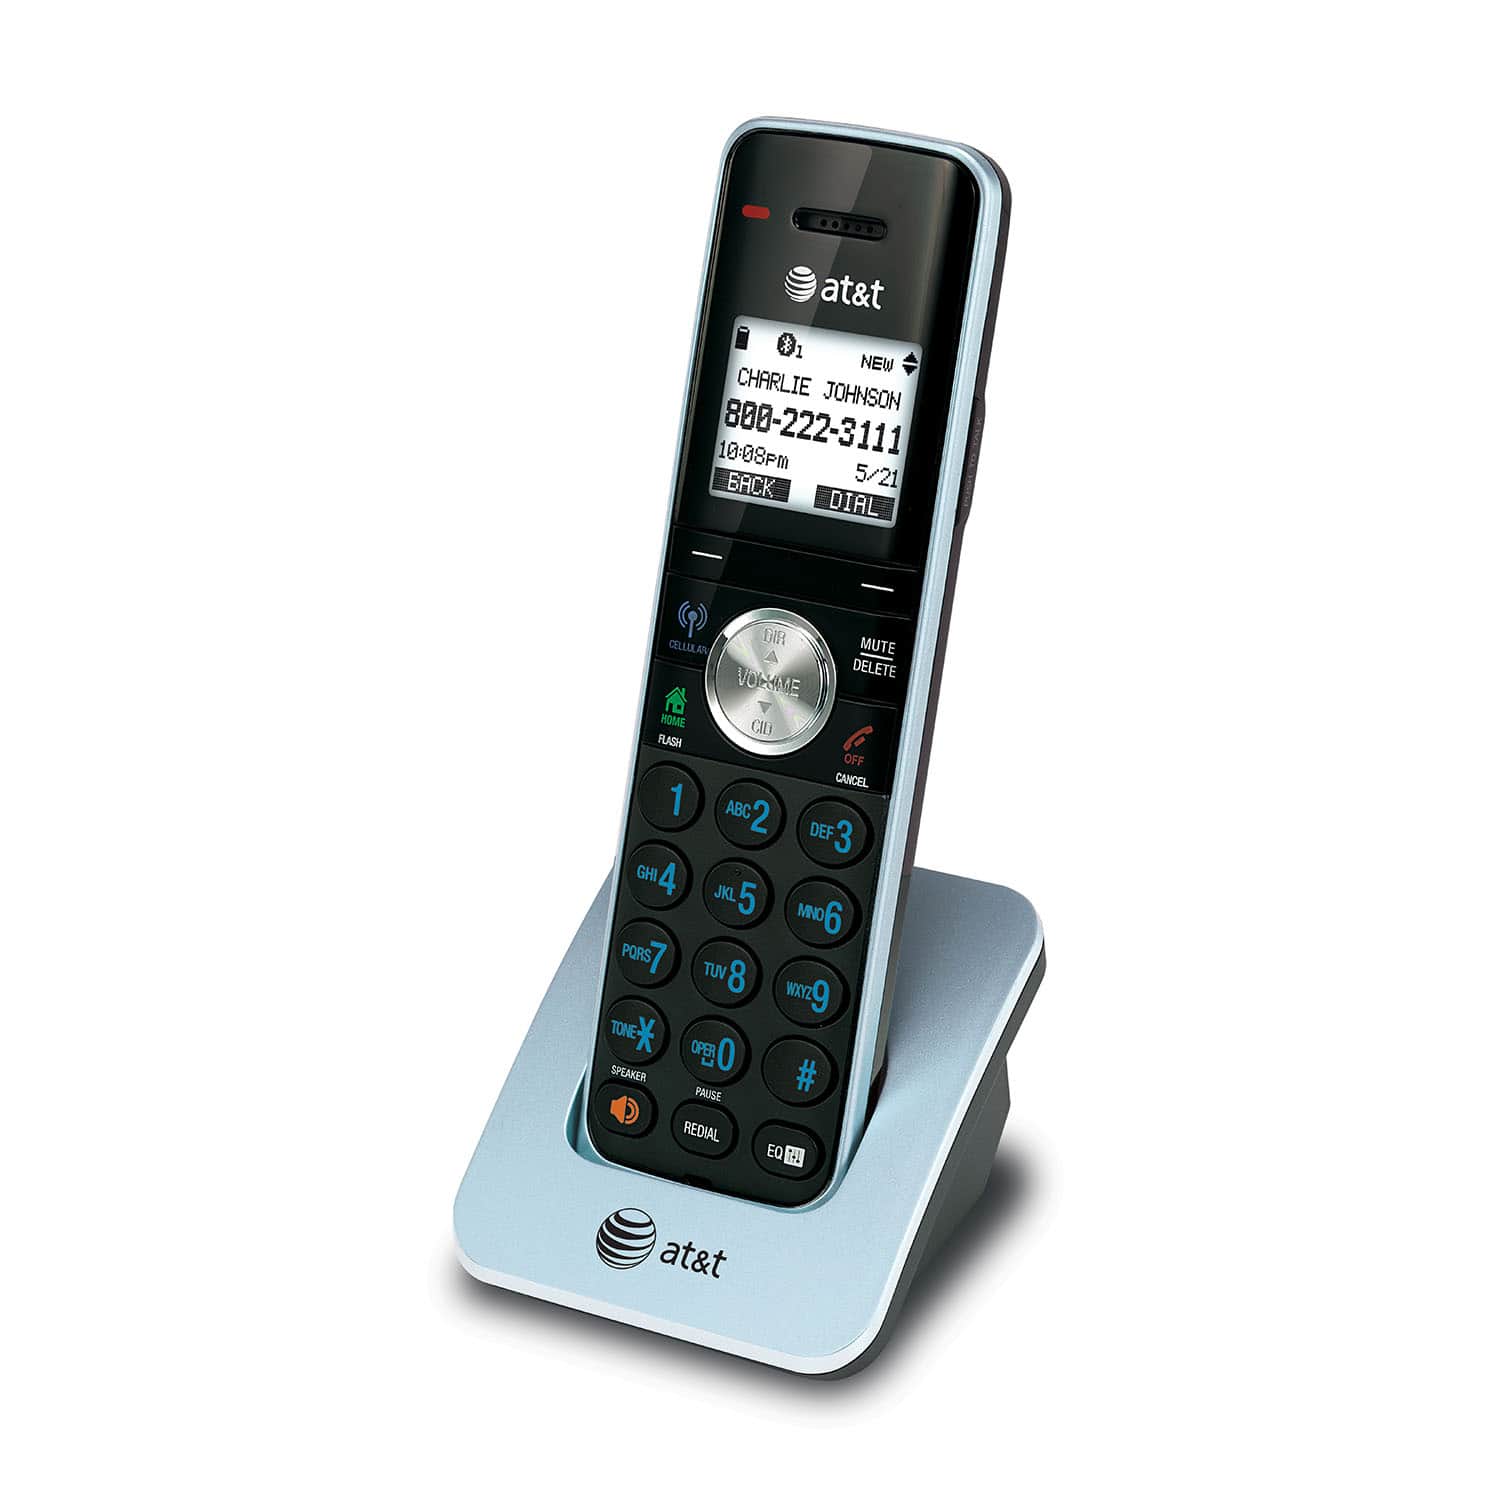 4 handset Connect to Cell™ answering system with dual caller ID/call waiting - view 4